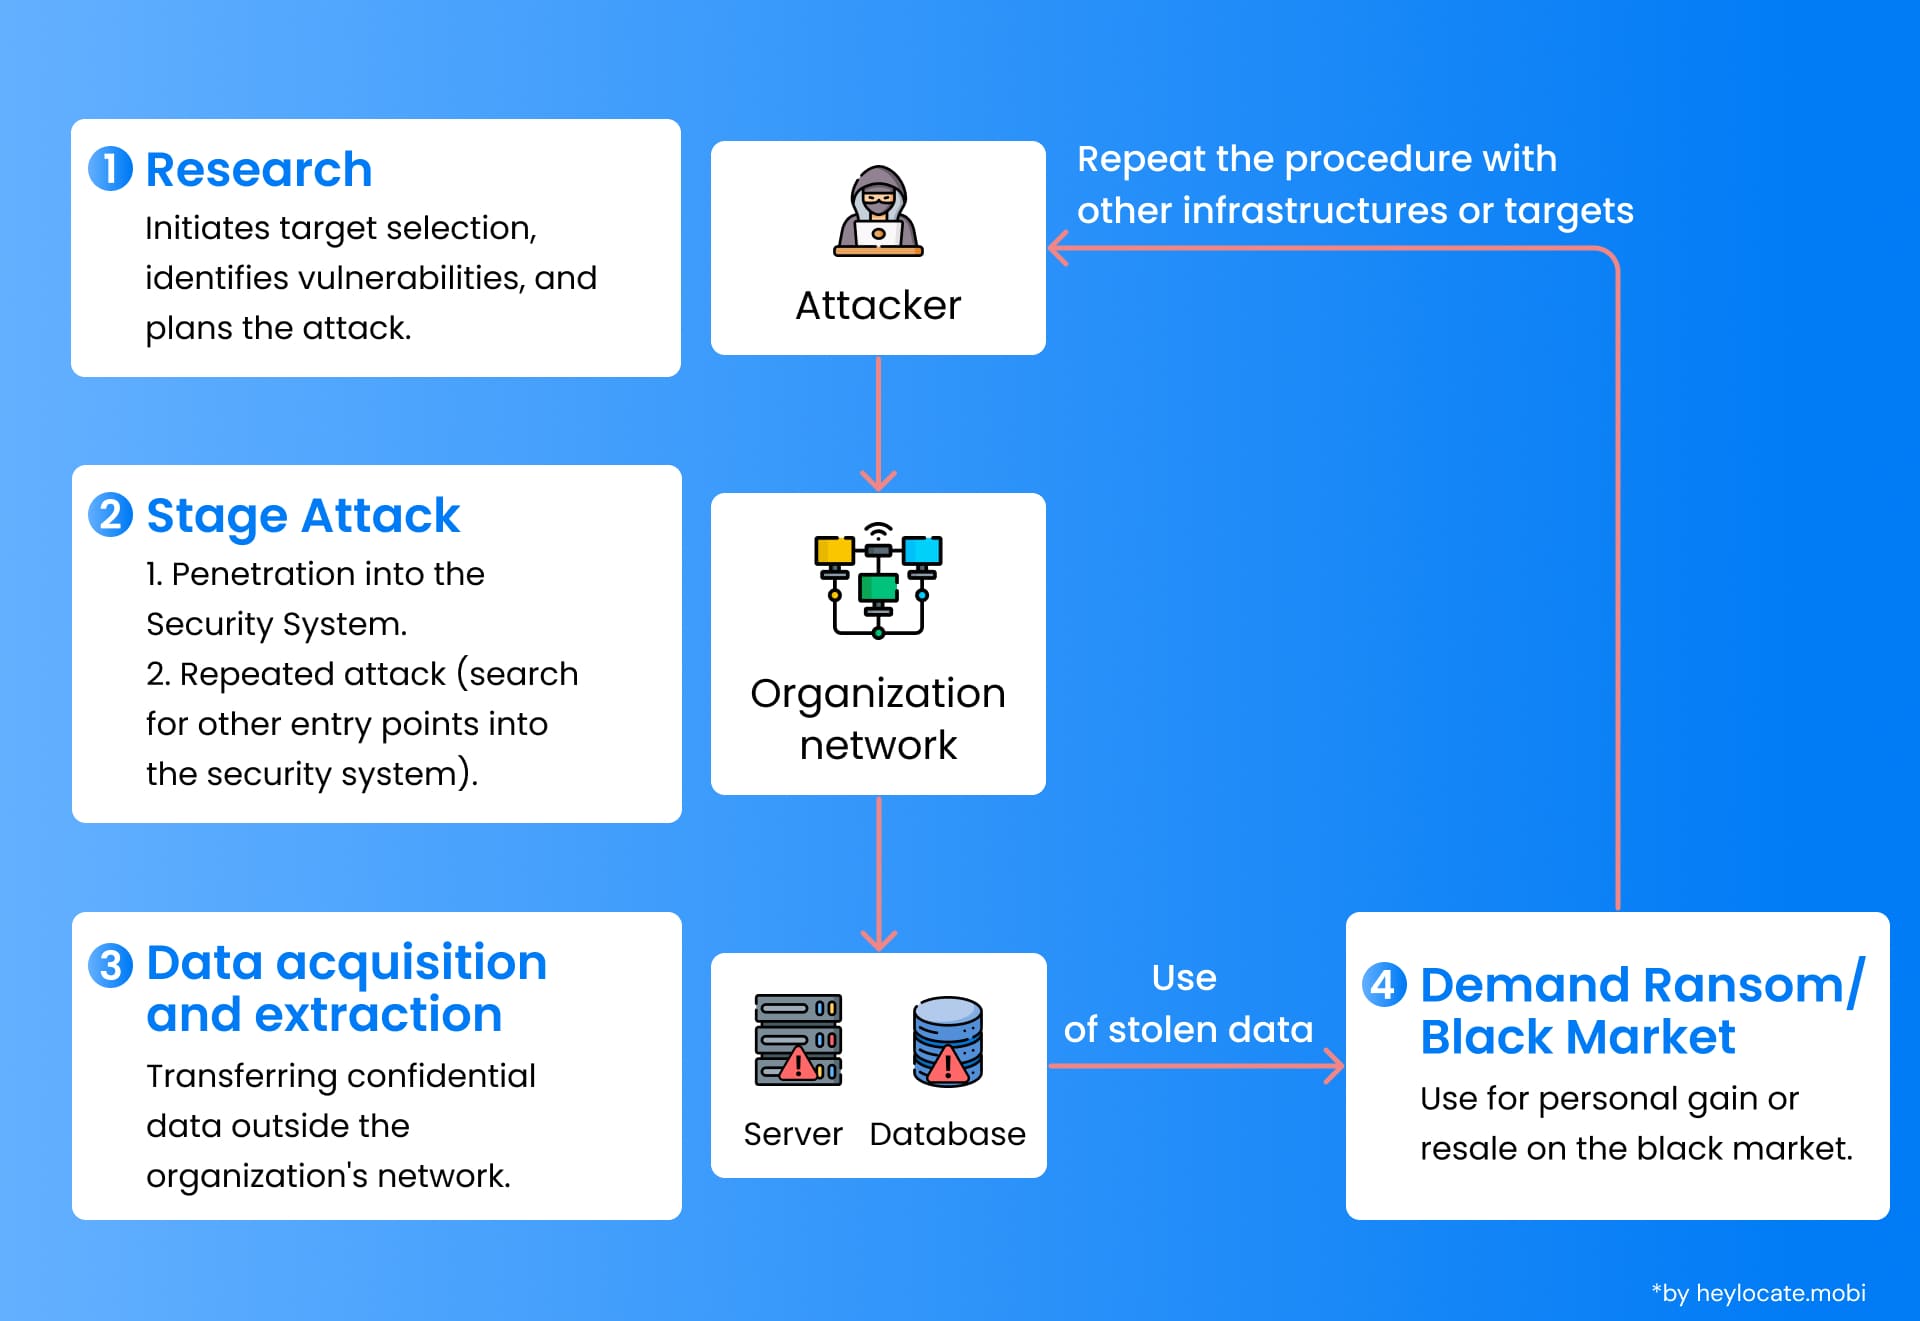 A flowchart illustrating the typical stages of a cyberattack. from the initial stages of research and attack to data extraction and potential ransom demands